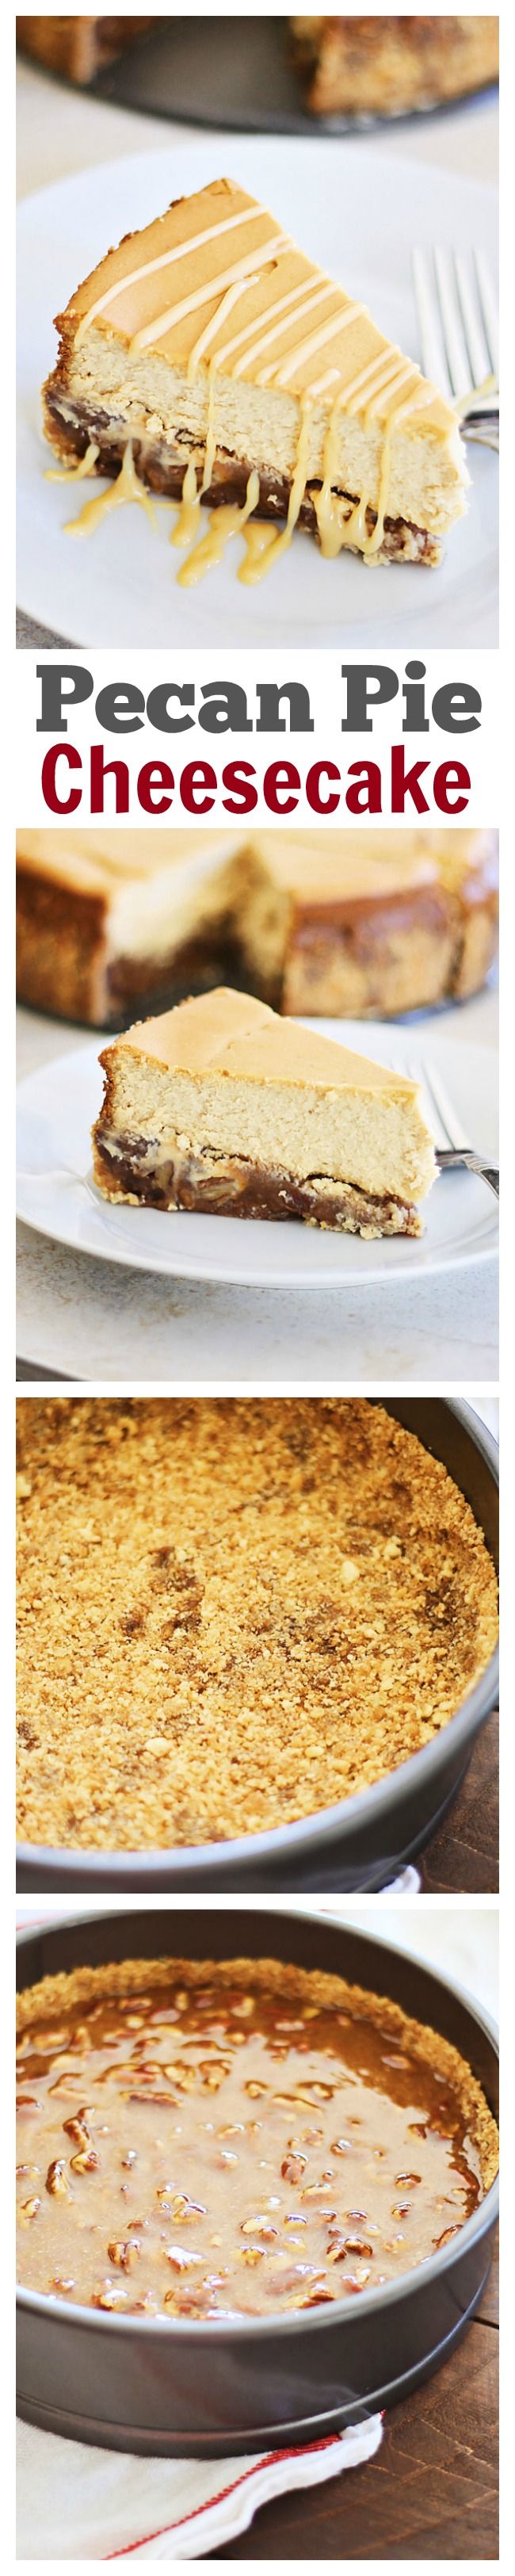 Pecan Pie Cheesecake – rich, creamy, and sinfully decadent cheesecake loaded with pecan and syrup. Absolutely amazing cheesecake that everyone wants more | rasamalaysia.com